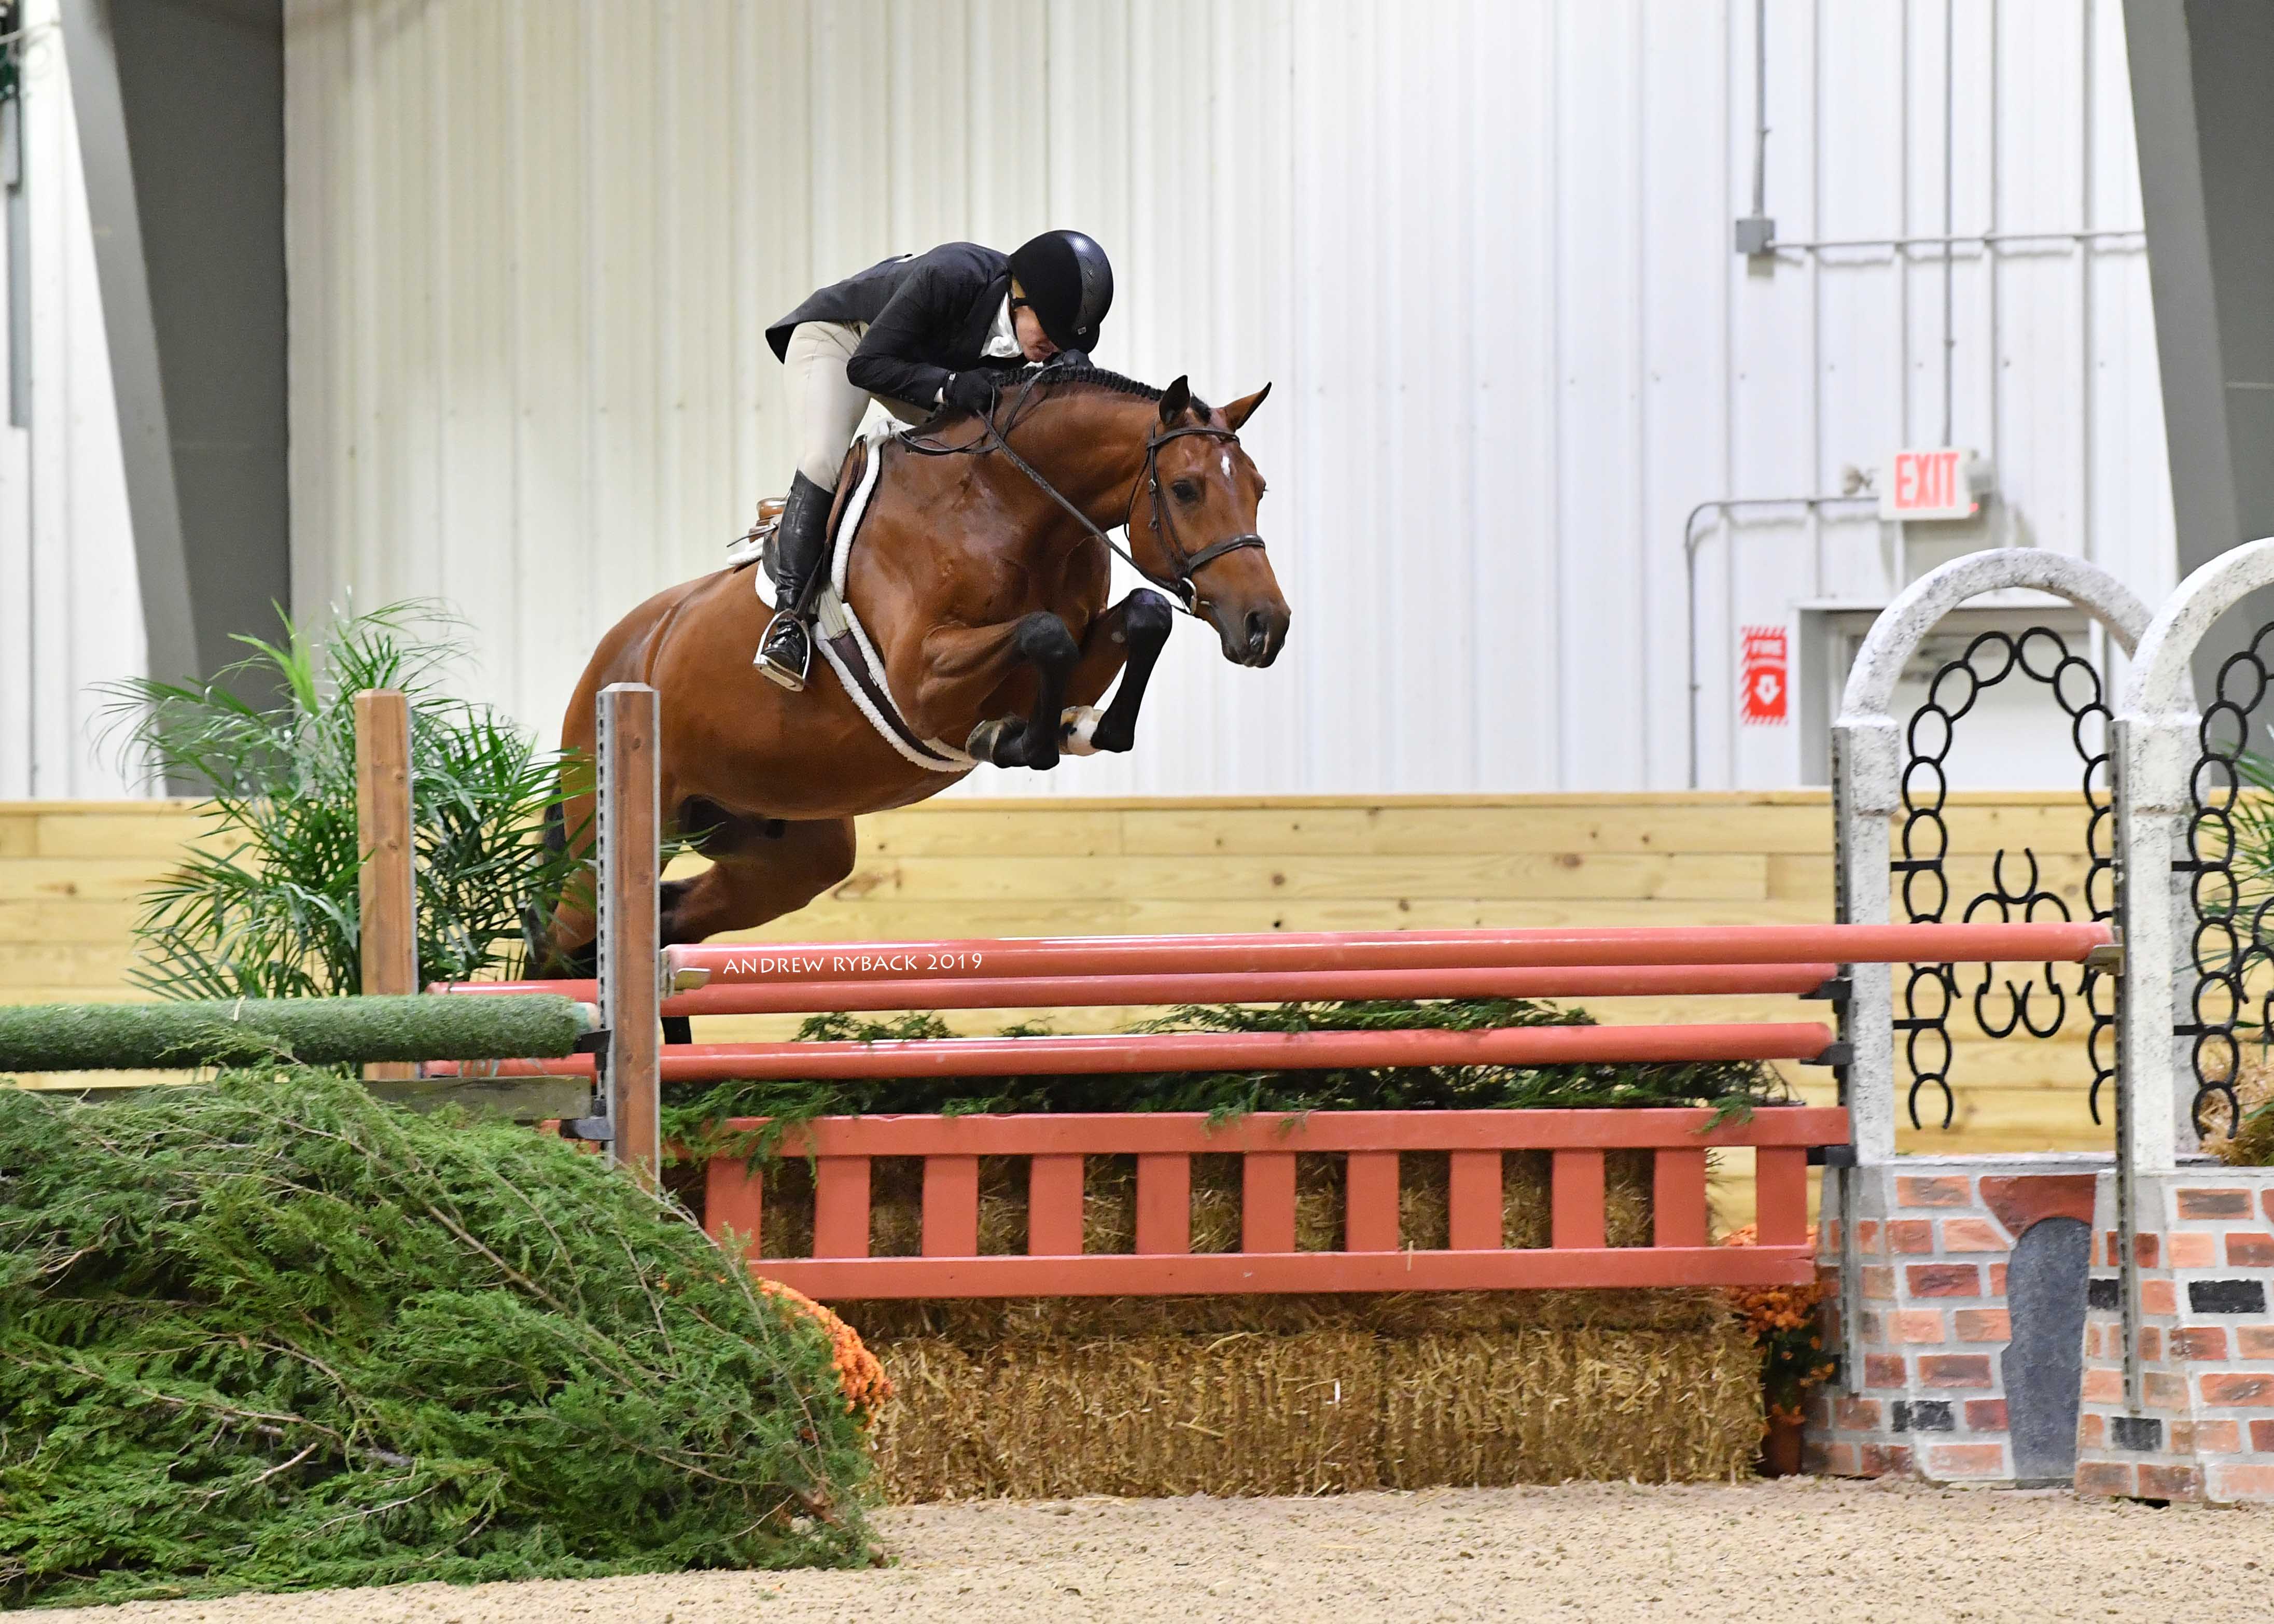 Greg Crolick and Corallo Z Take Top Honors in the $40,000 USHJA  International Hunter Derby - World Equestrian Center